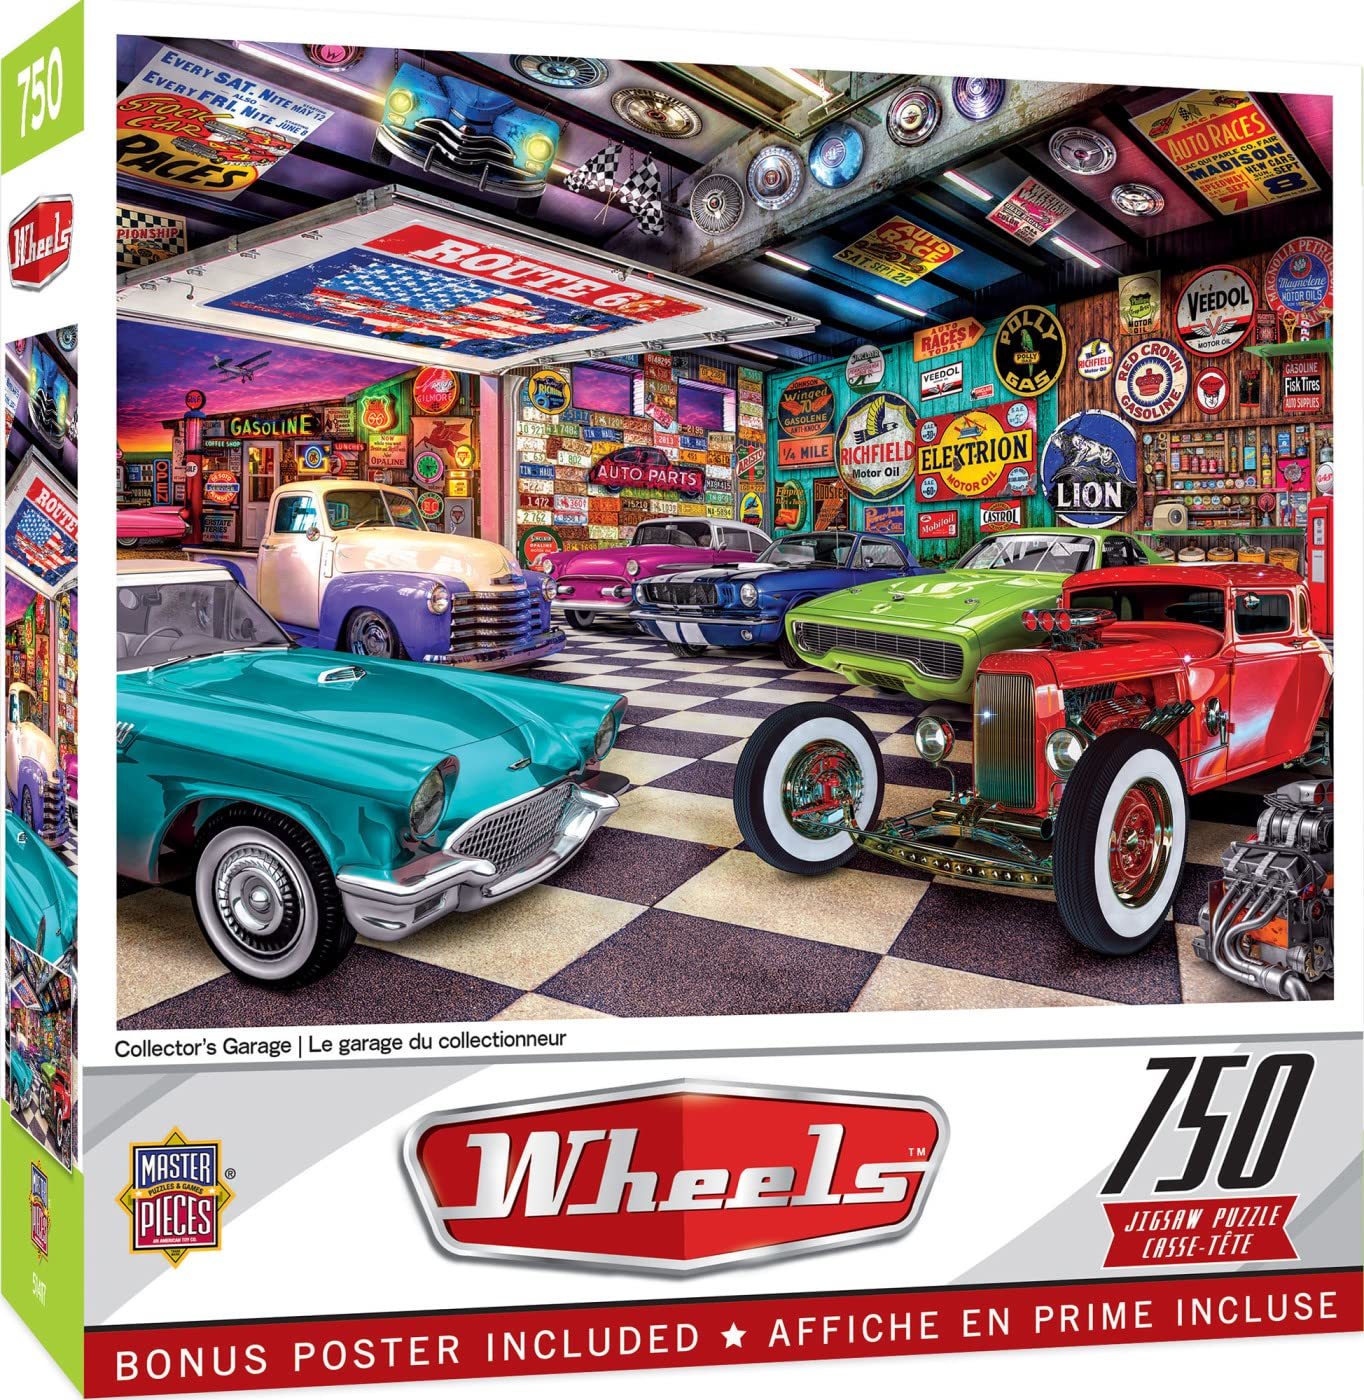 MasterPieces 750 Piece Jigsaw Puzzle for Adults and Family - Wayne's Garage - 18 - $19.55